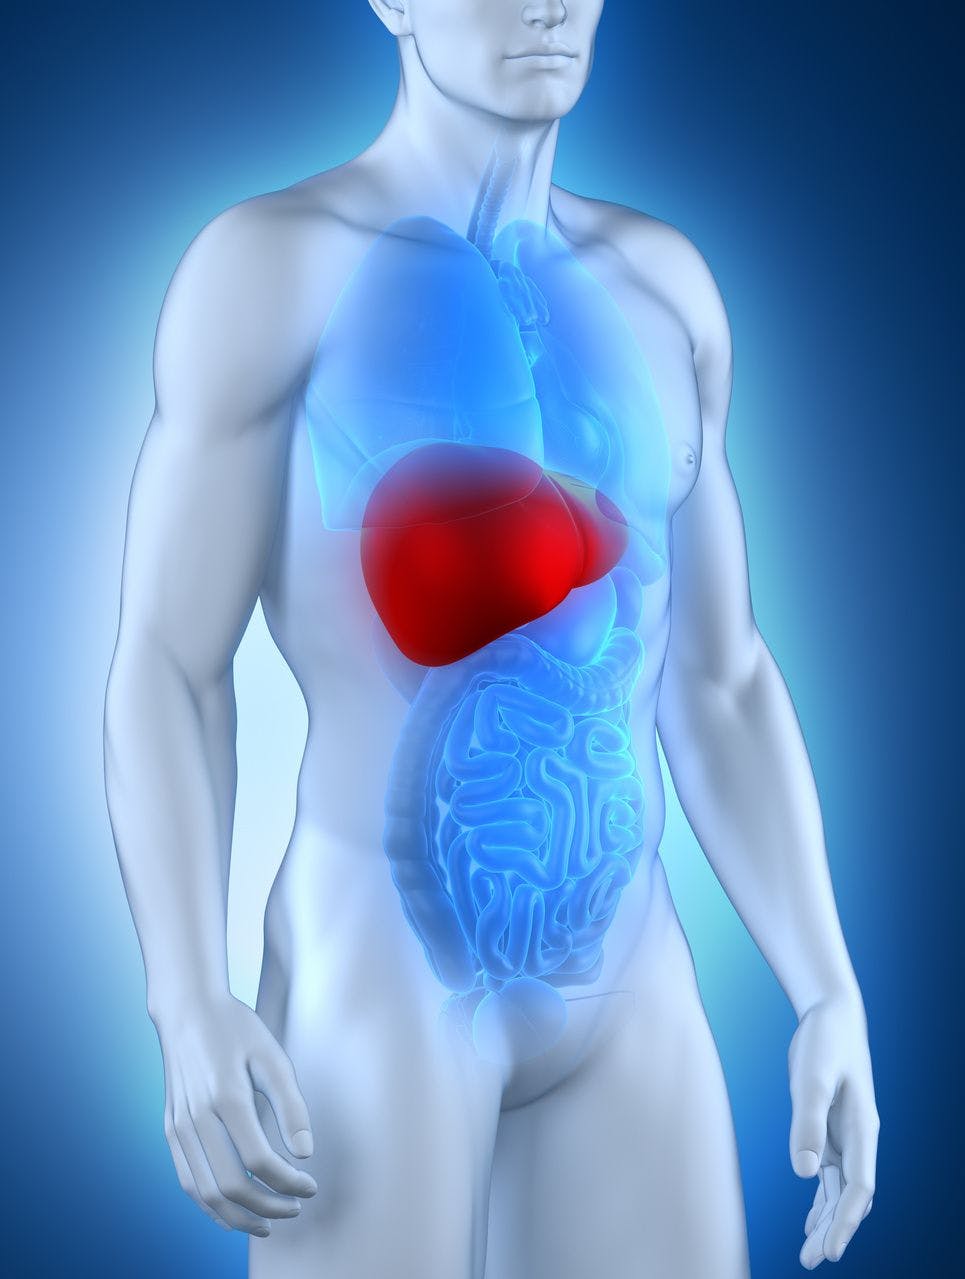 Tesamorelin Shows Effectiveness at Fighting NAFLD in Patients With HIV